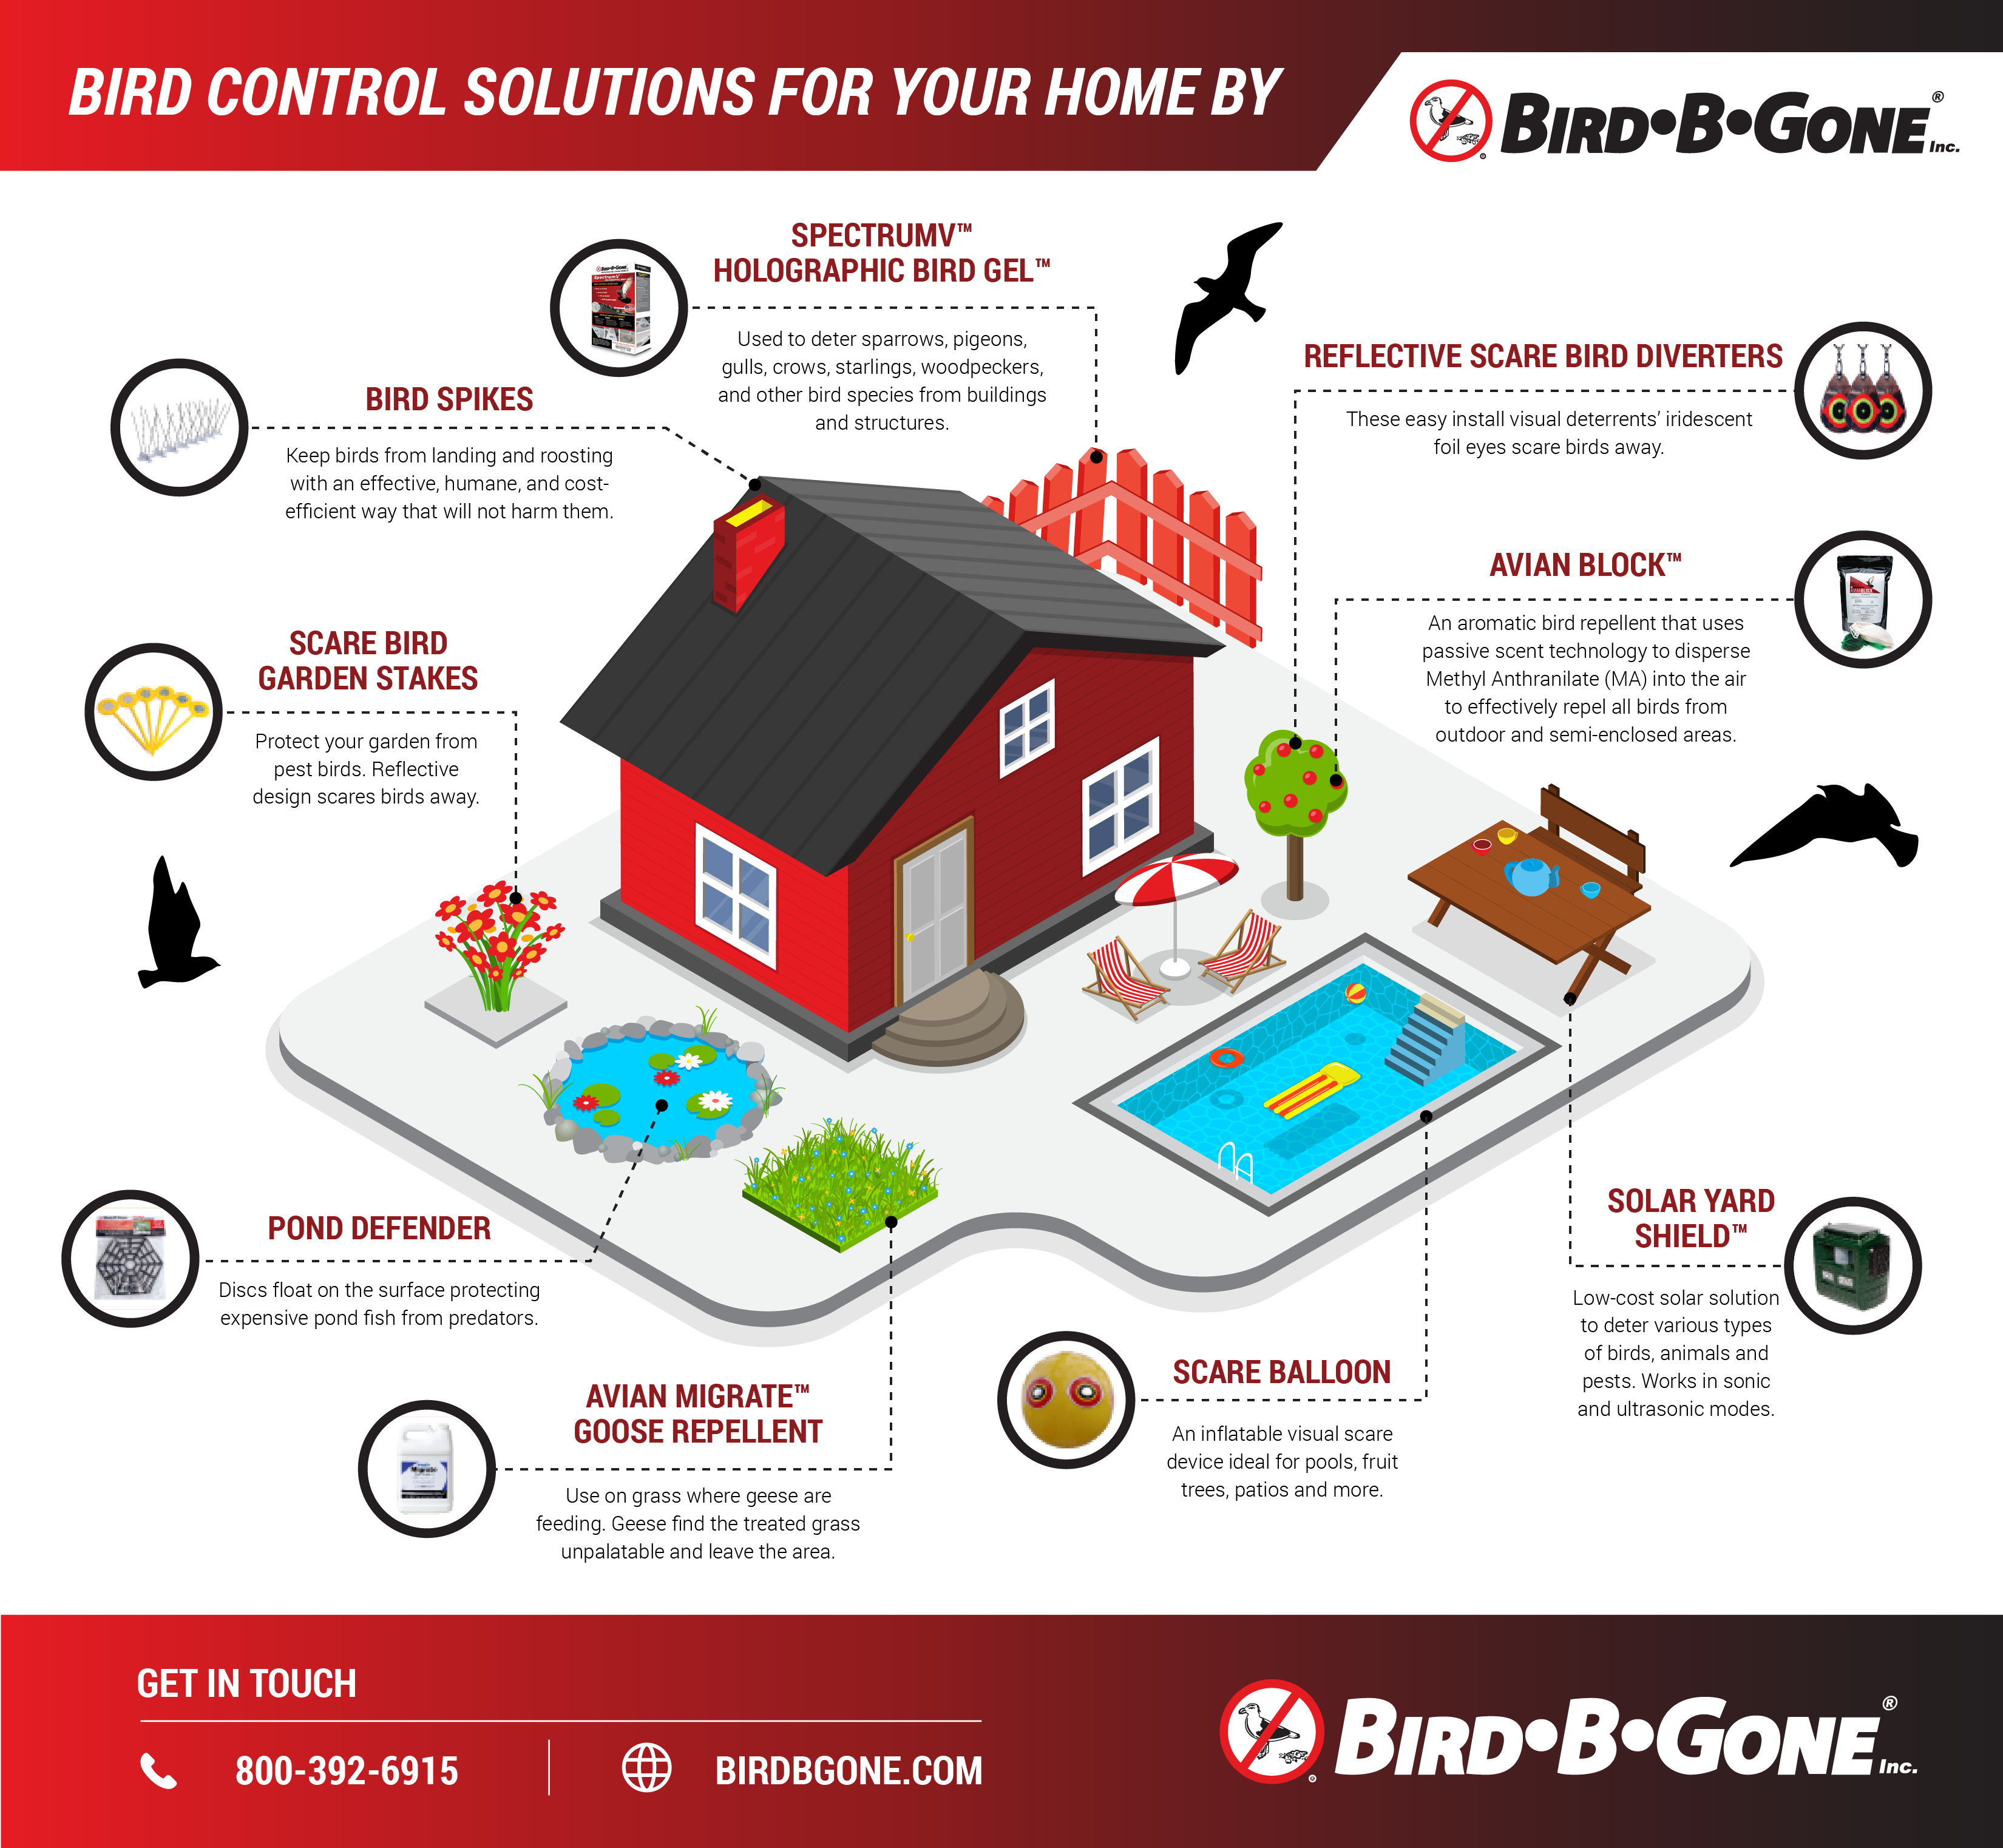 Bird control solutions for your home infographic